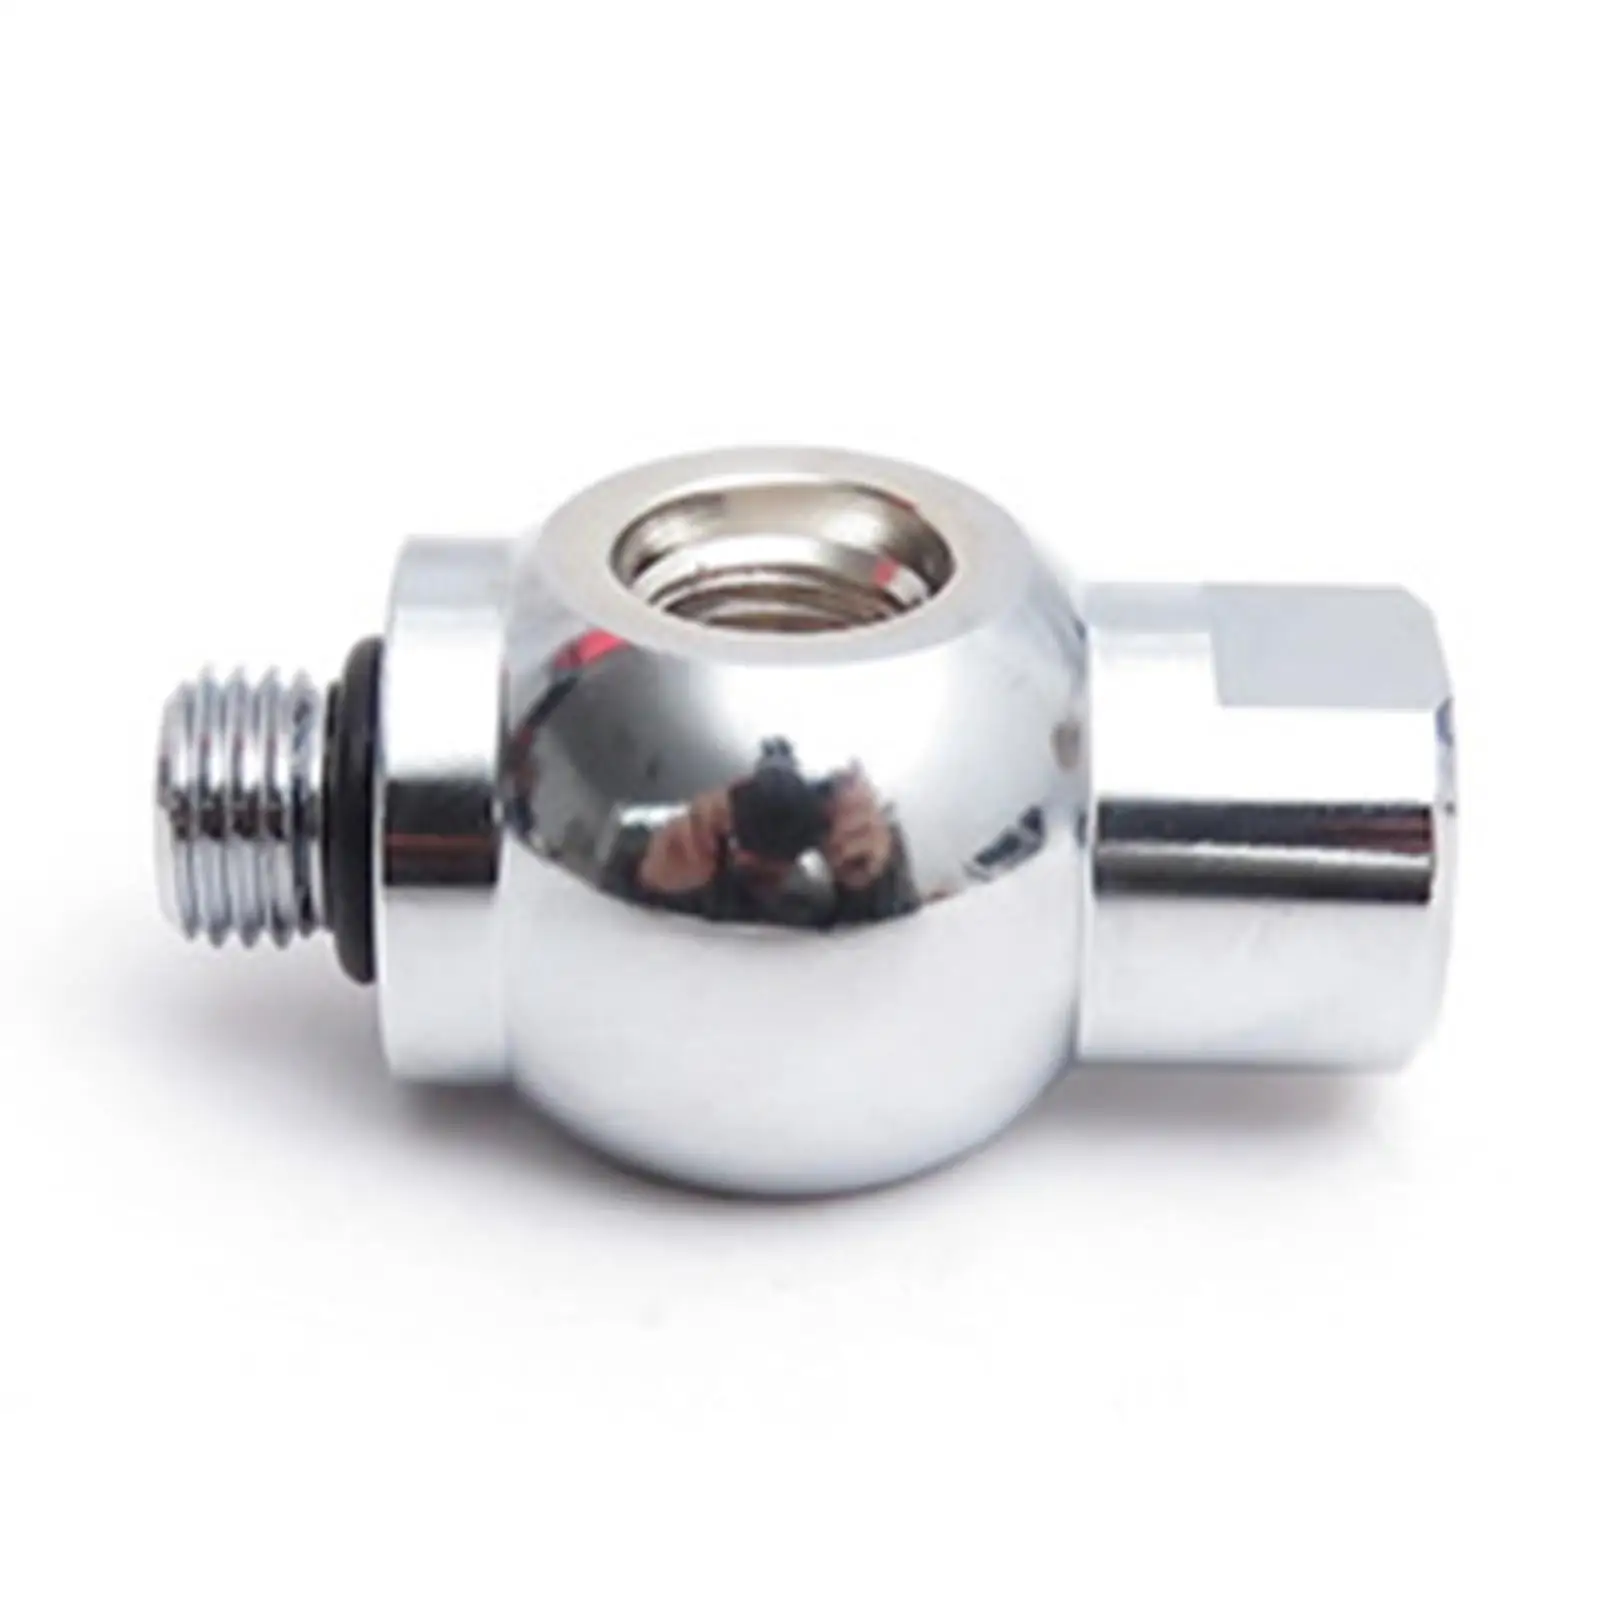 Scuba Diving Regulator Adapter 1ST Stage Connector Low Pressure Hose Adapter 3/8-24 3 Ways for Regulator Pipe Accessory